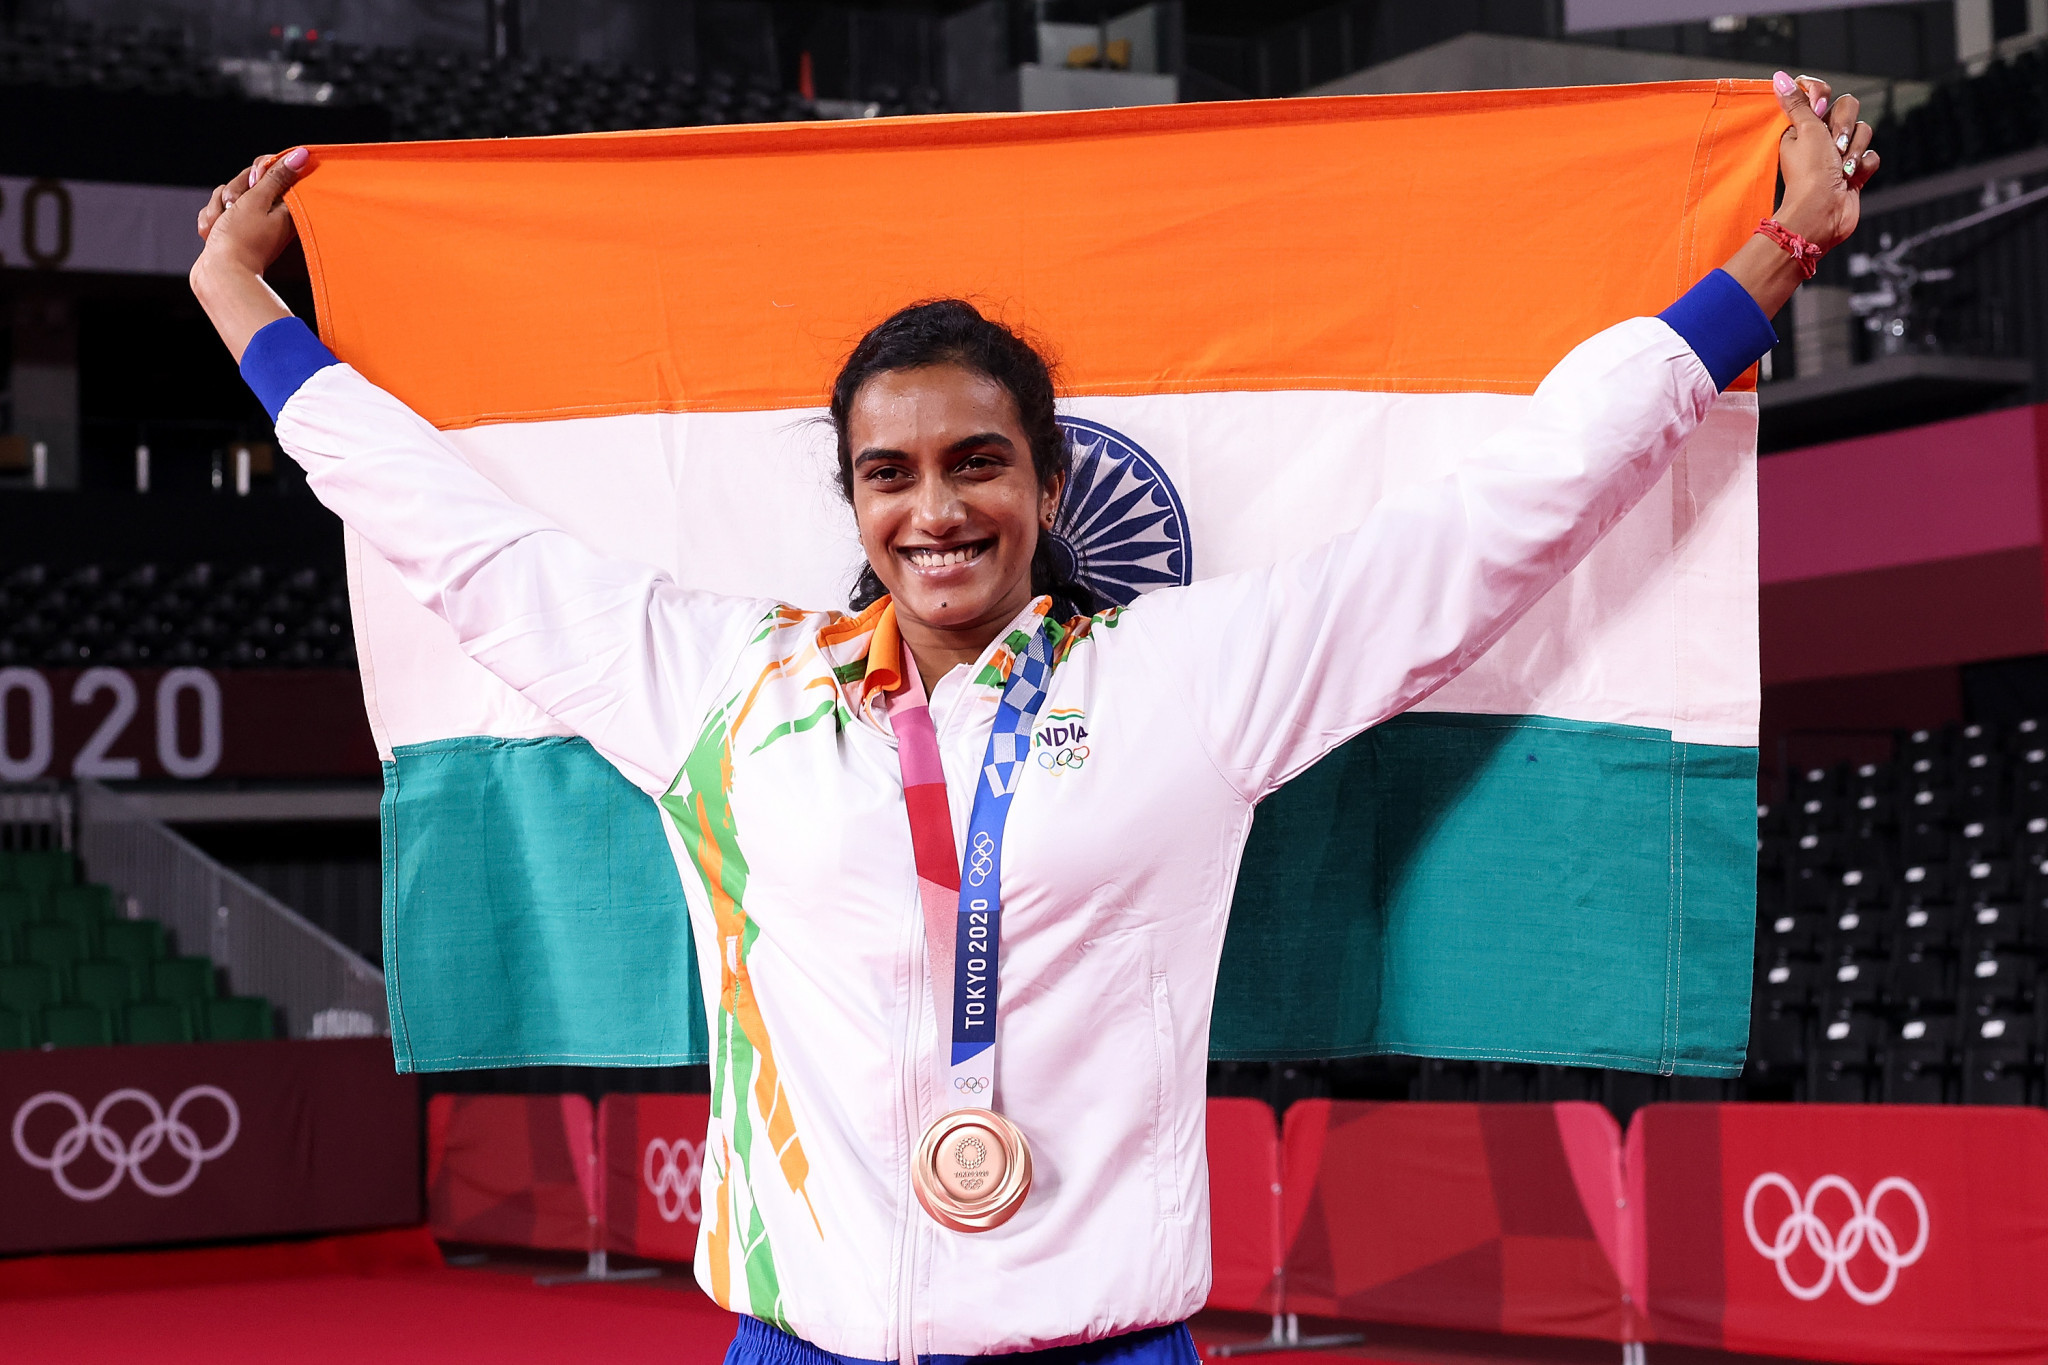 Badminton player PV Sindhu, who won Olympic medals at Rio 2016 and Tokyo 2020, is starting to become more appreciated in her native India, according to Anju Bobby George ©Getty Images  